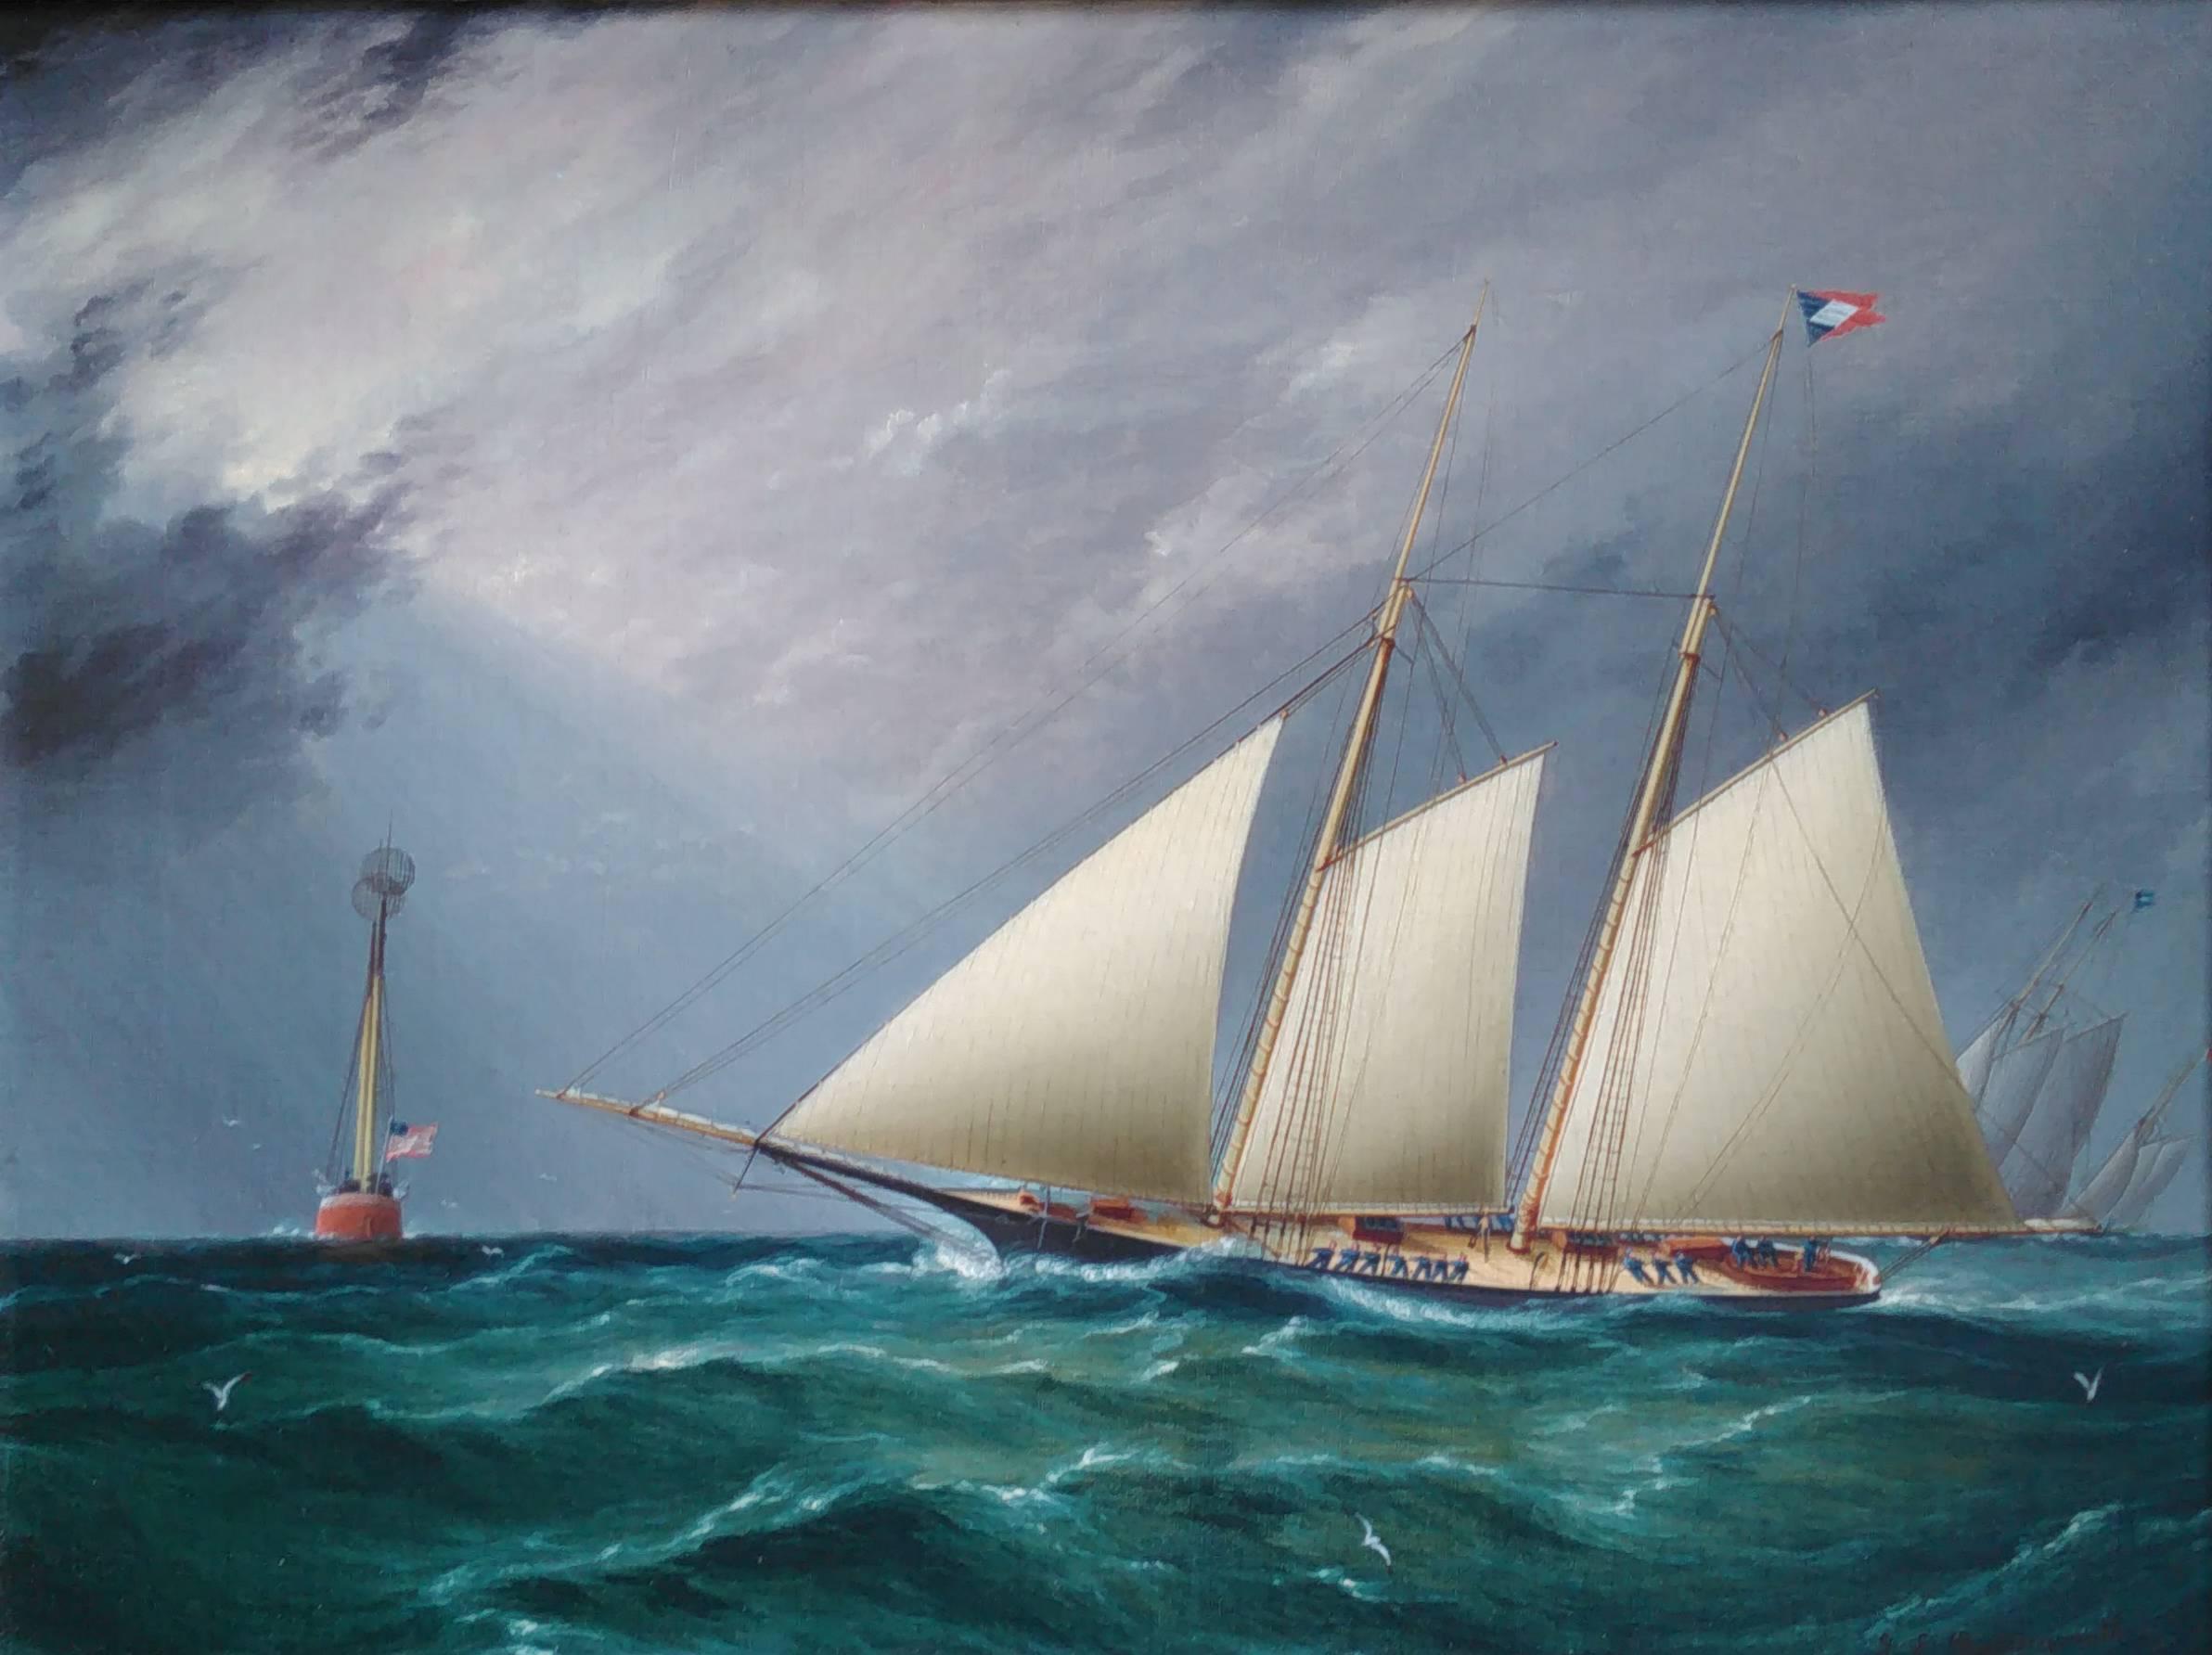 SAPPHO Leading DAUNTLESS Around the Mark - Painting by James Edward Buttersworth